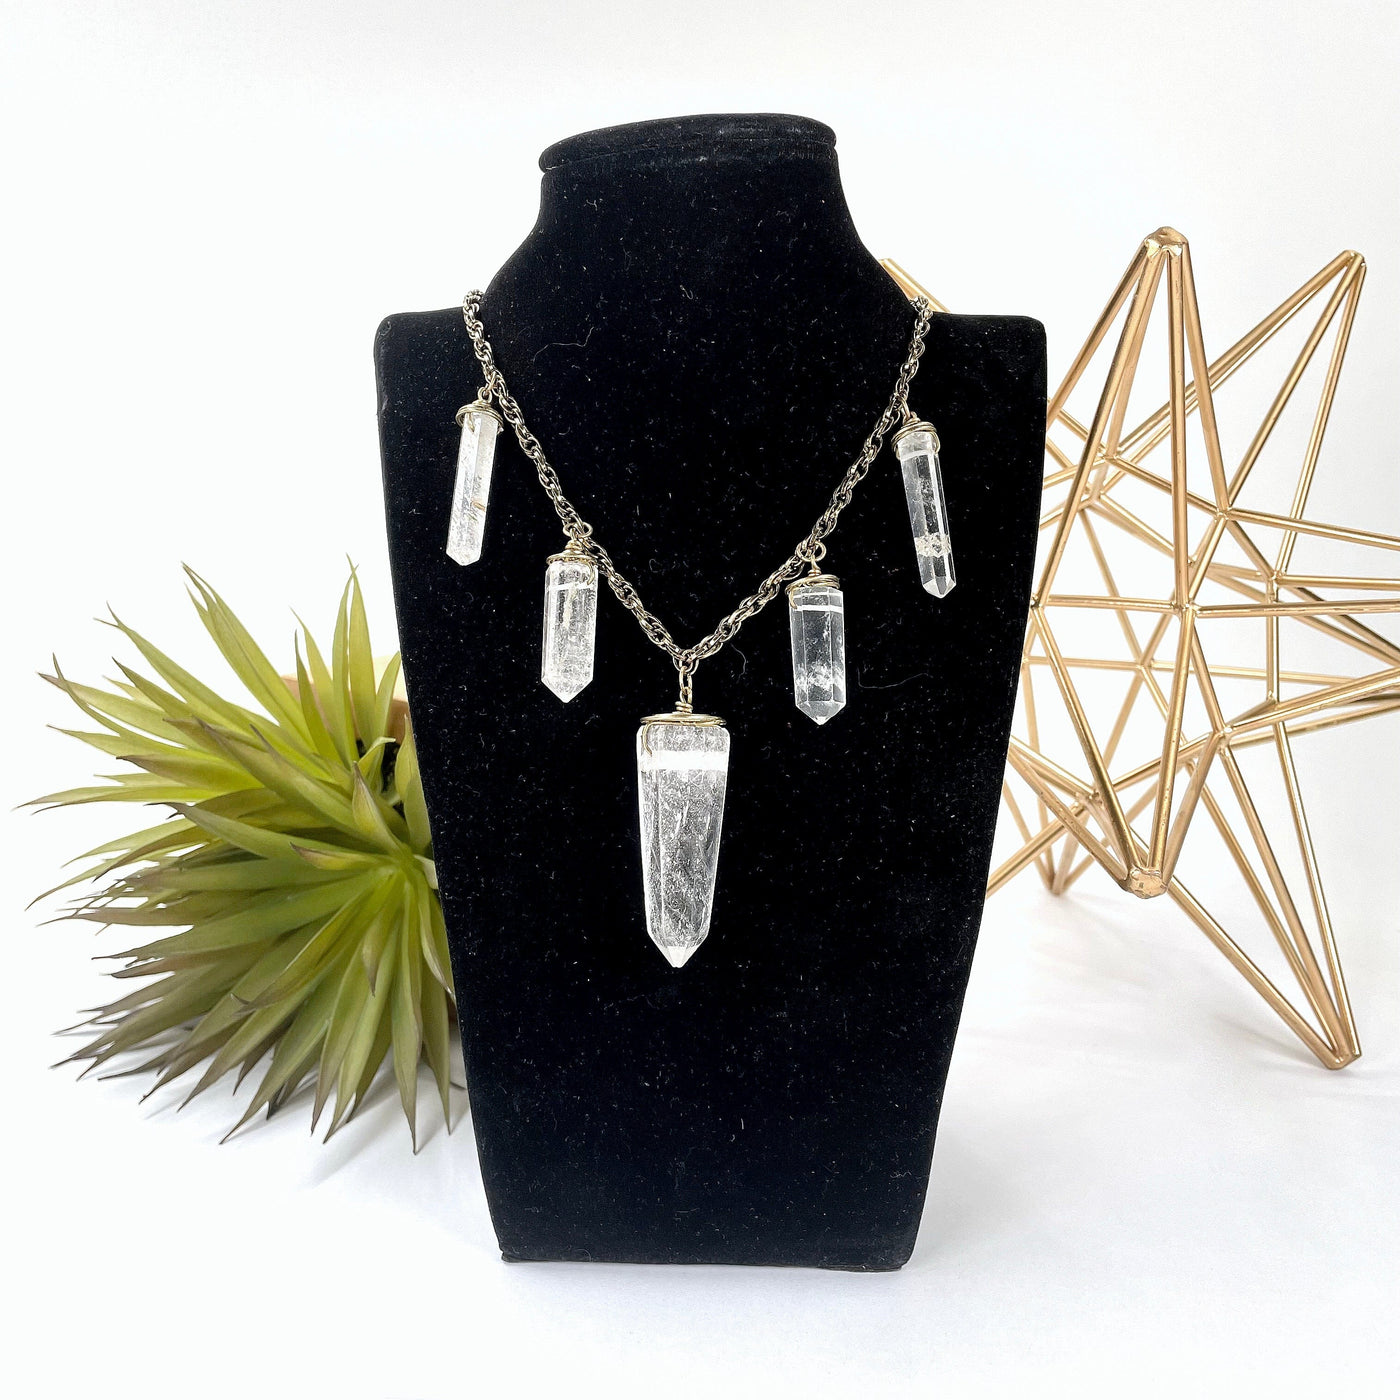 crystal quartz point five pendant necklace on bust display in front of backdrop